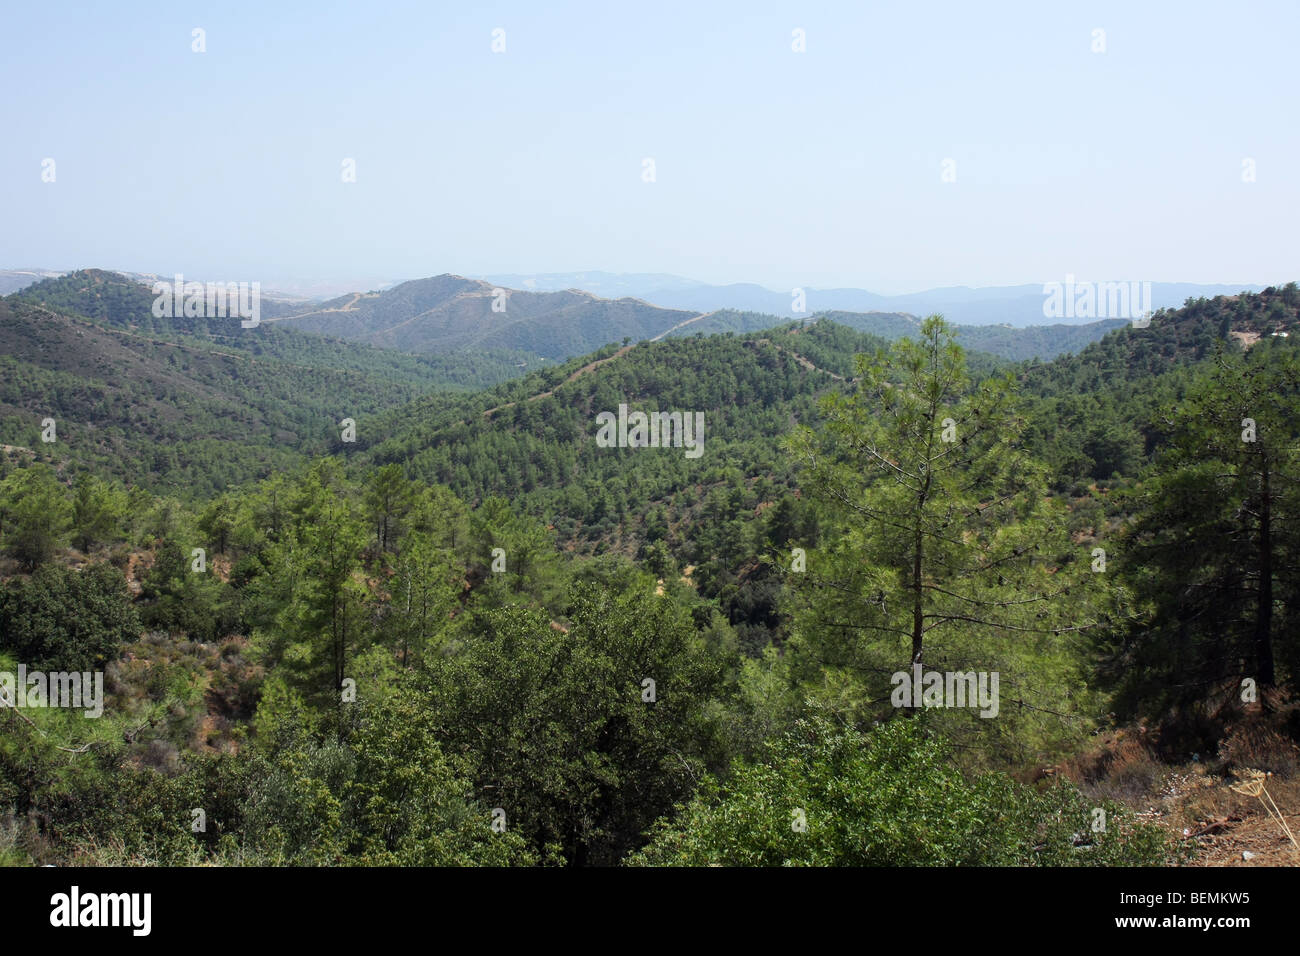 View from the Troodos mountains in Cyprus. Stock Photo